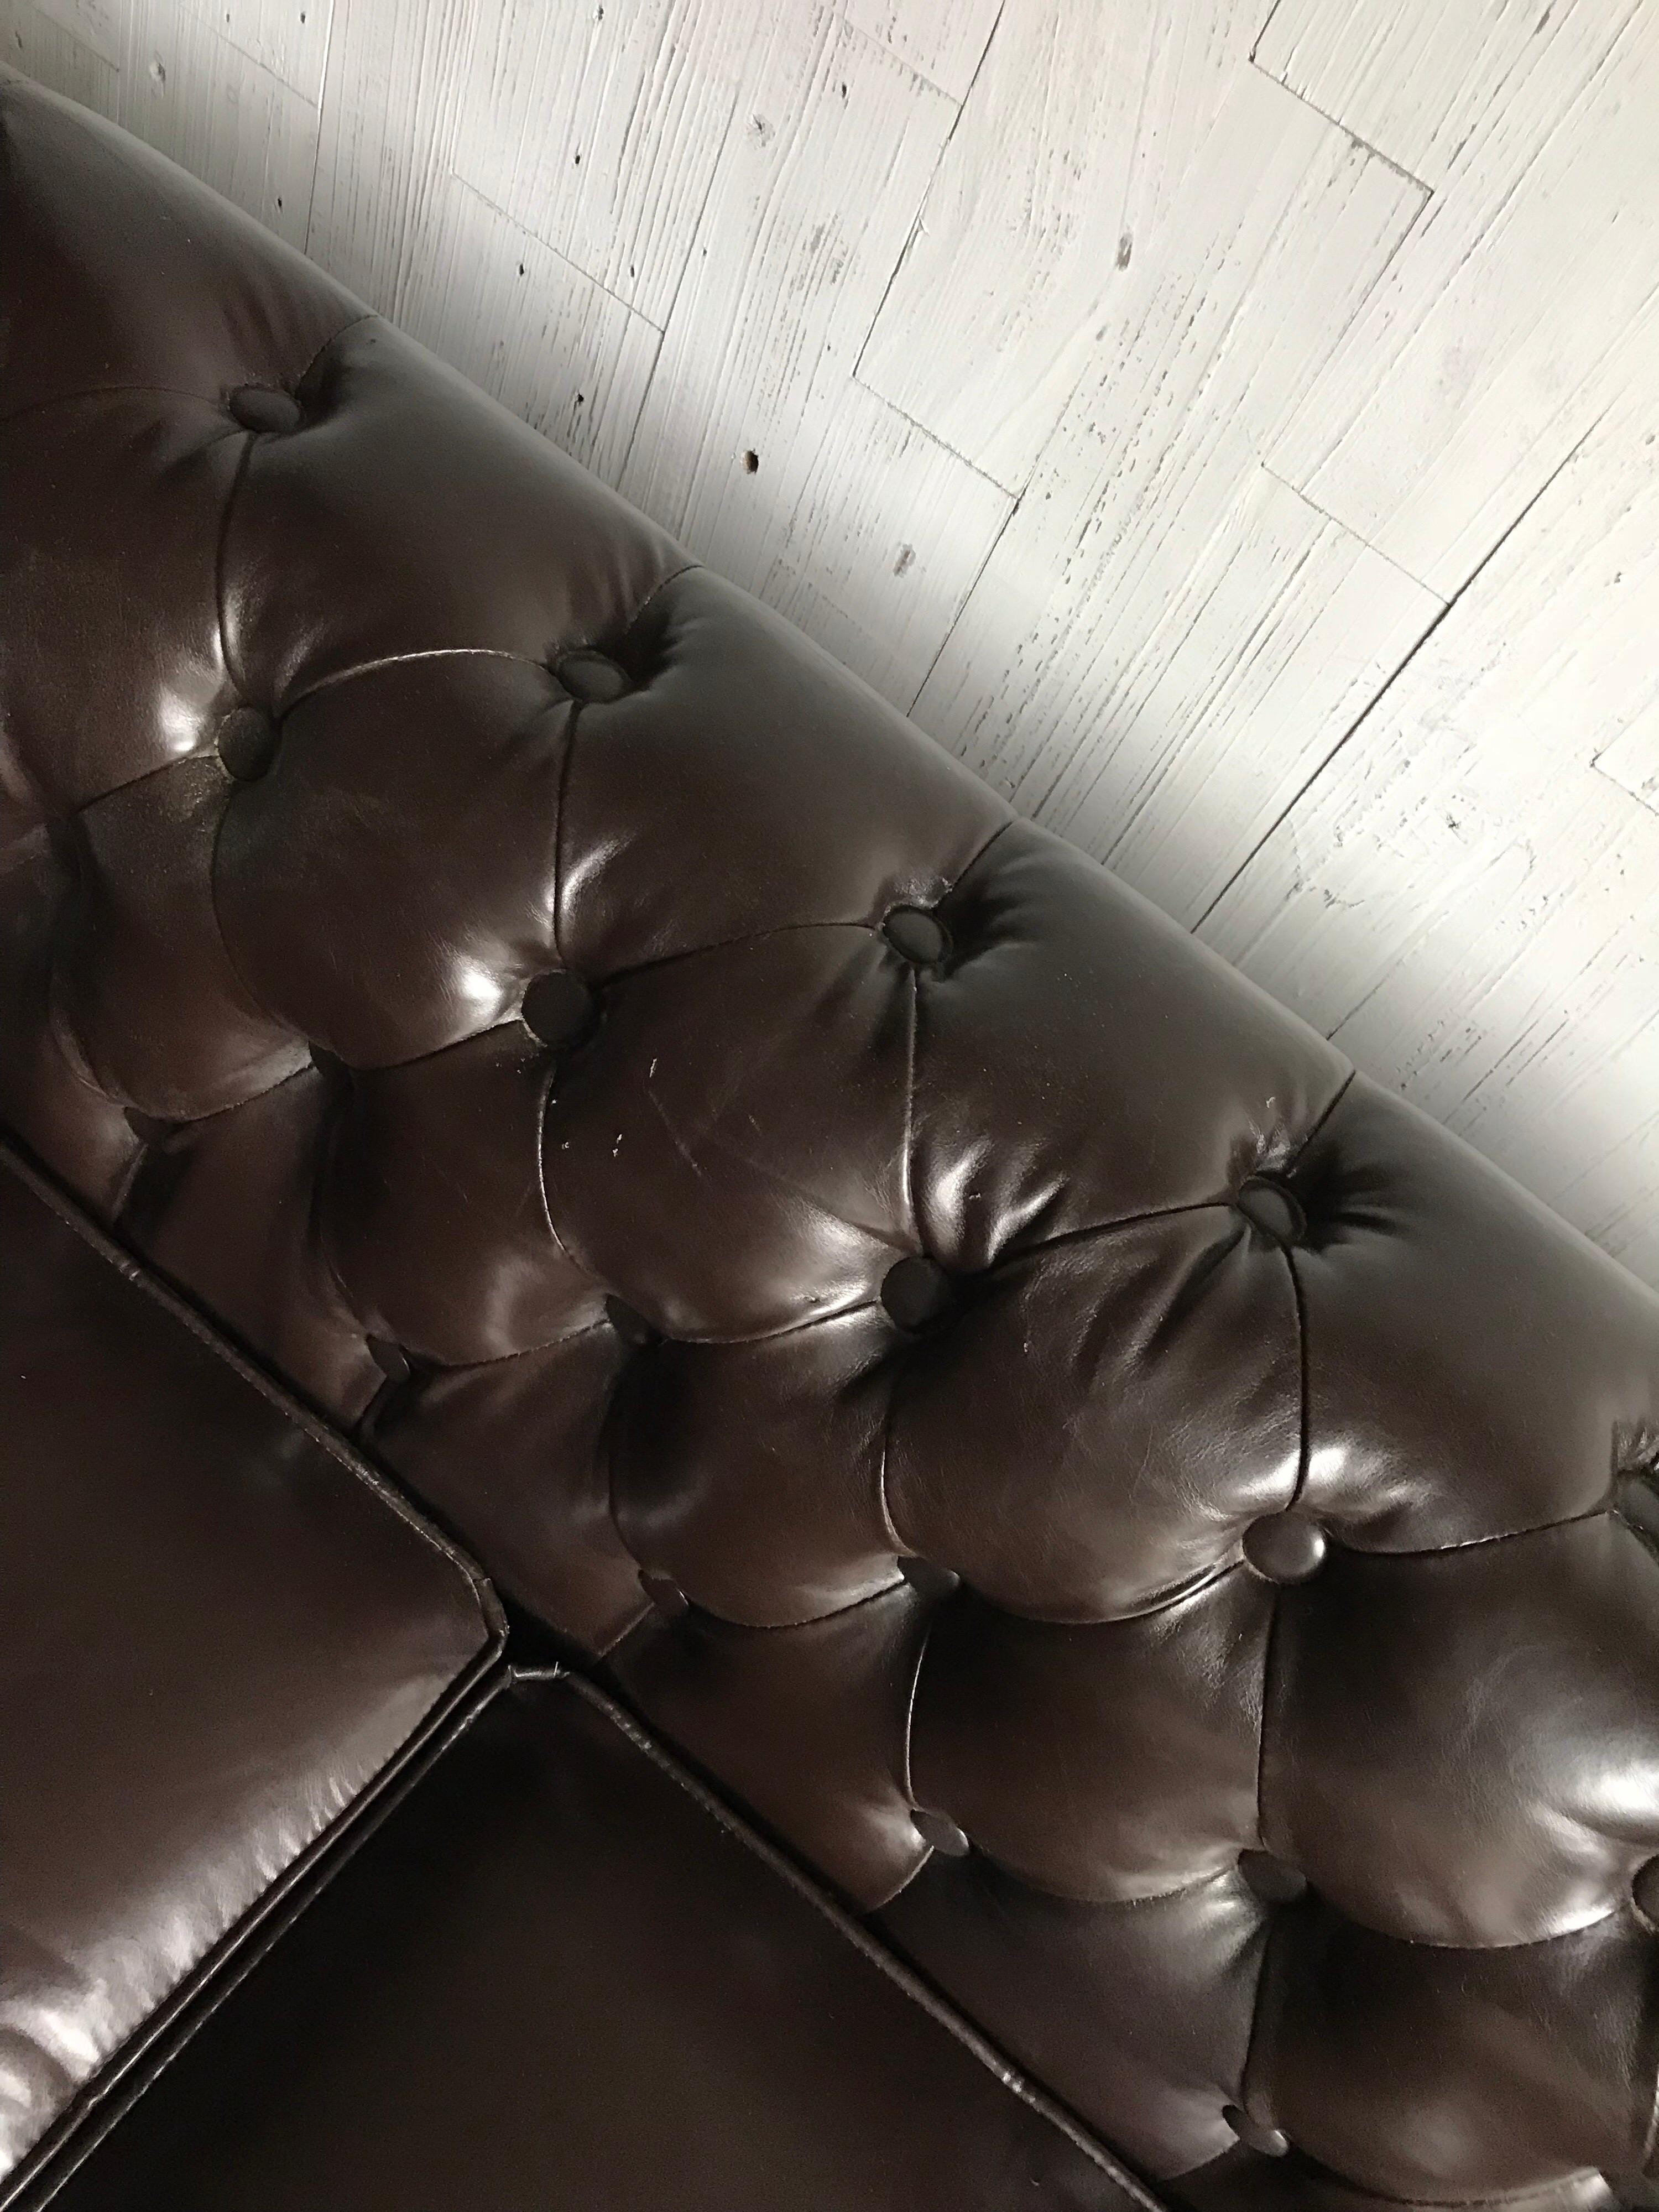 English mid-20th century emerald tufted Chesterfield sofa with a rich dark brown leather upholstery with three cushions.